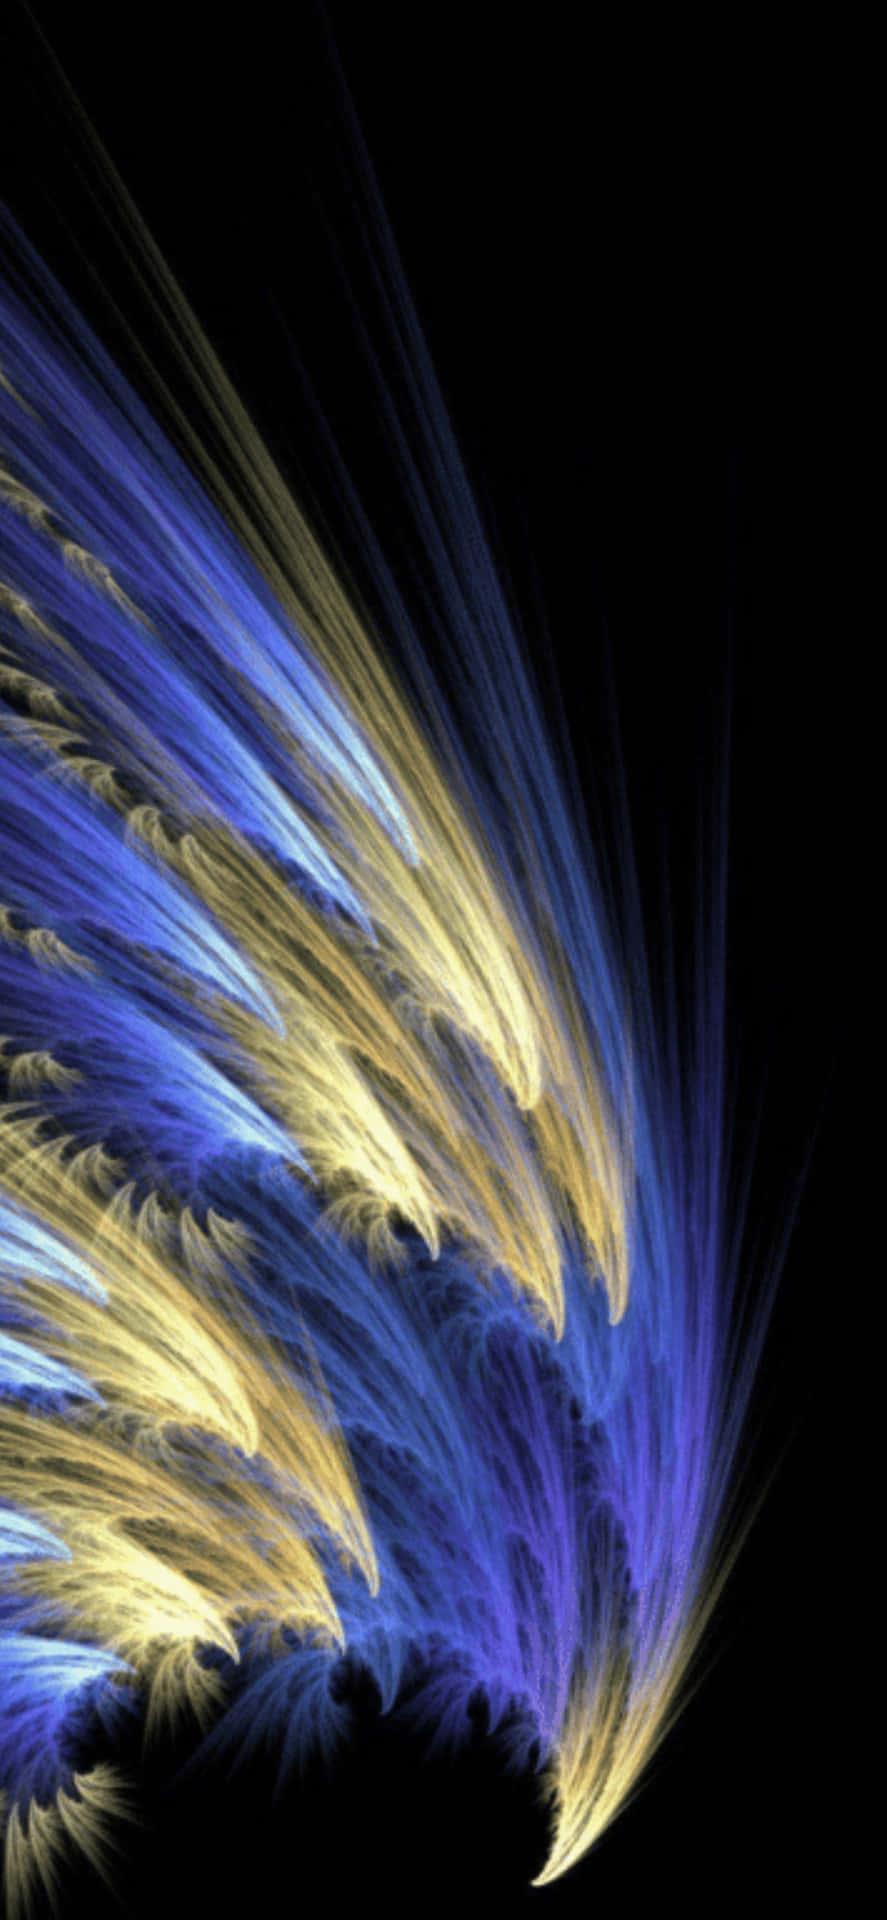 A Blue And Yellow Abstract Pattern On A Black Background